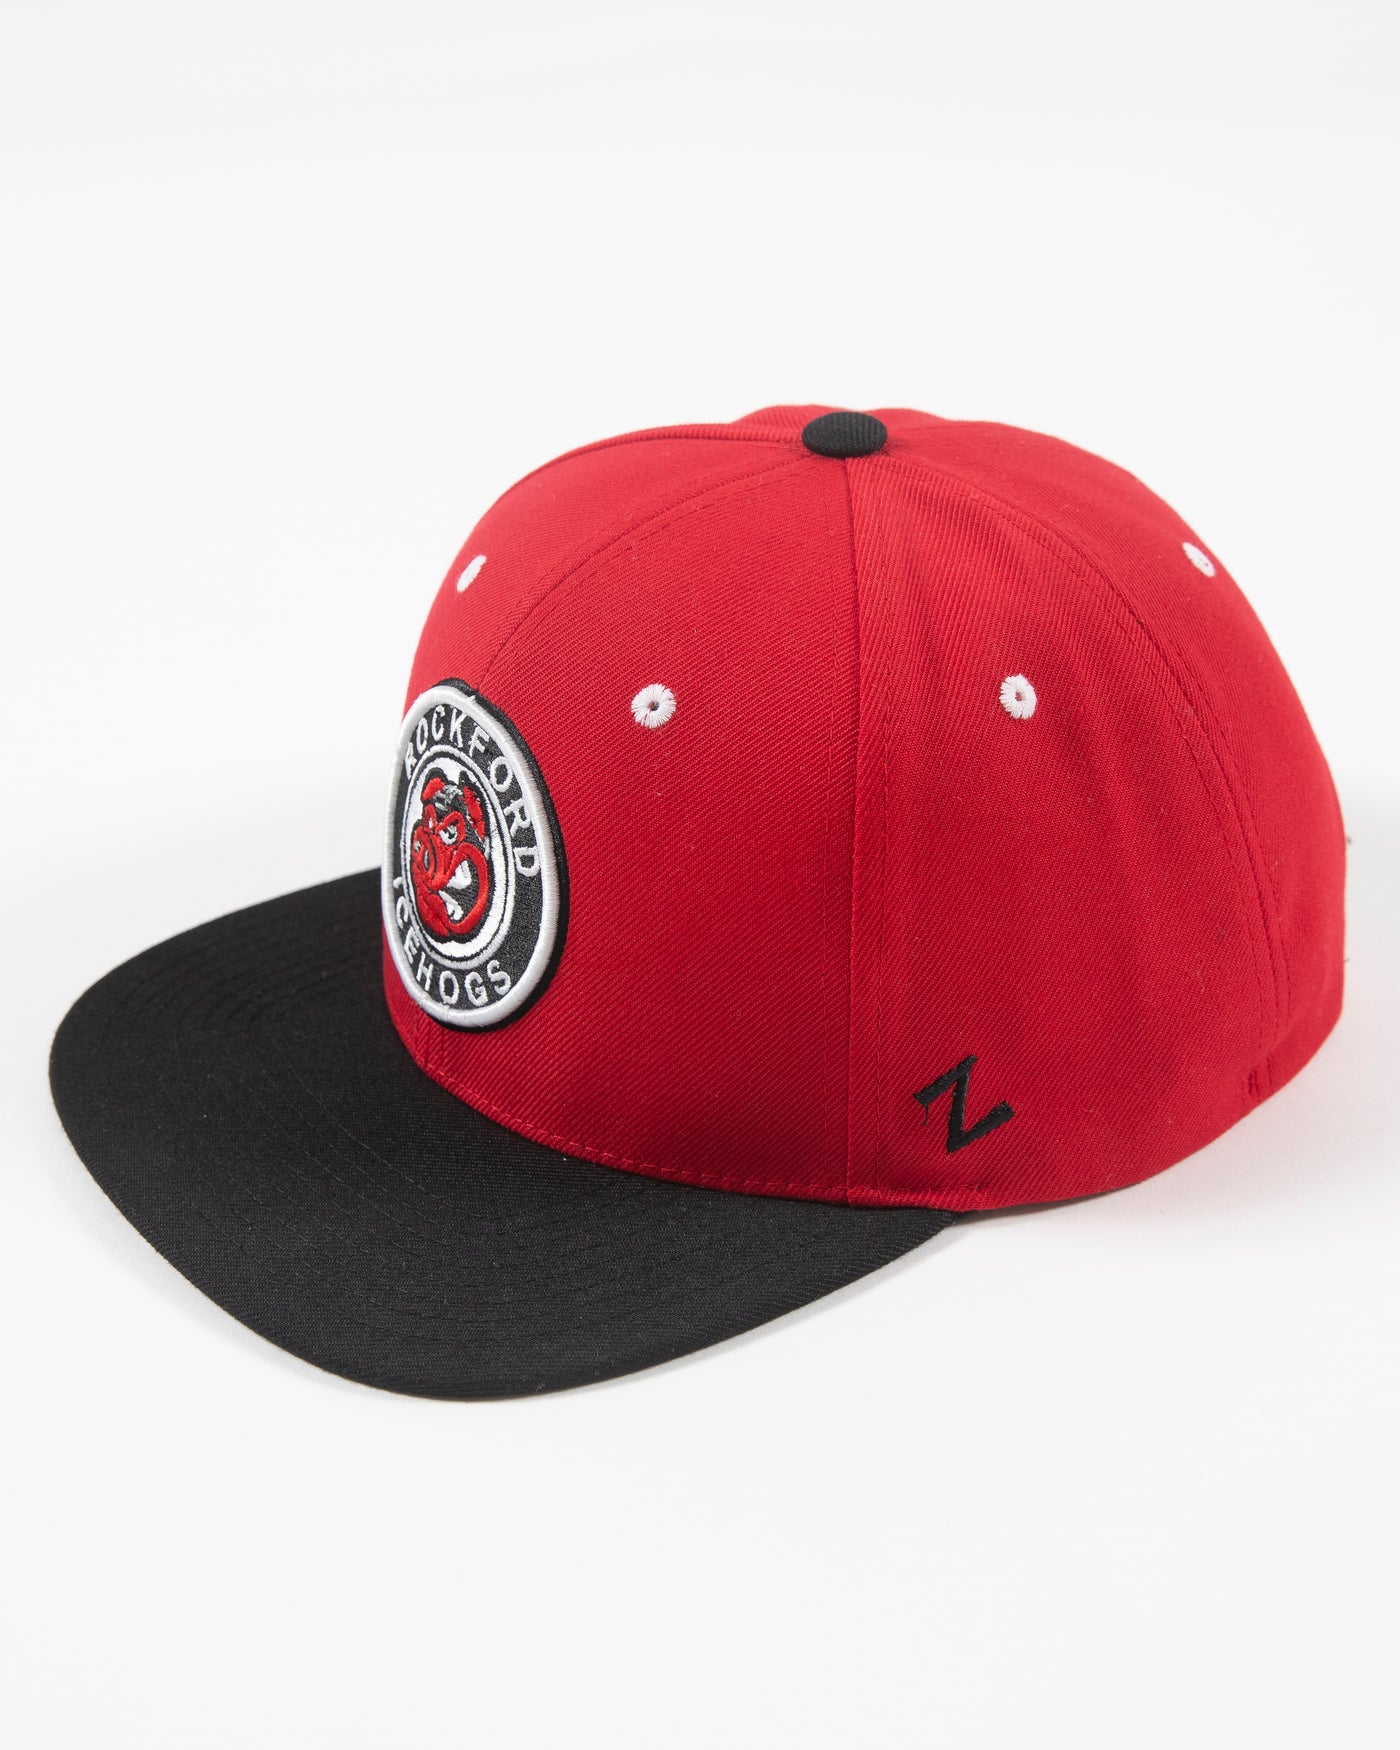 Black and red flat brim adjustable cap with Rockford IceHogs classic logo embroidered on front - left lay flat